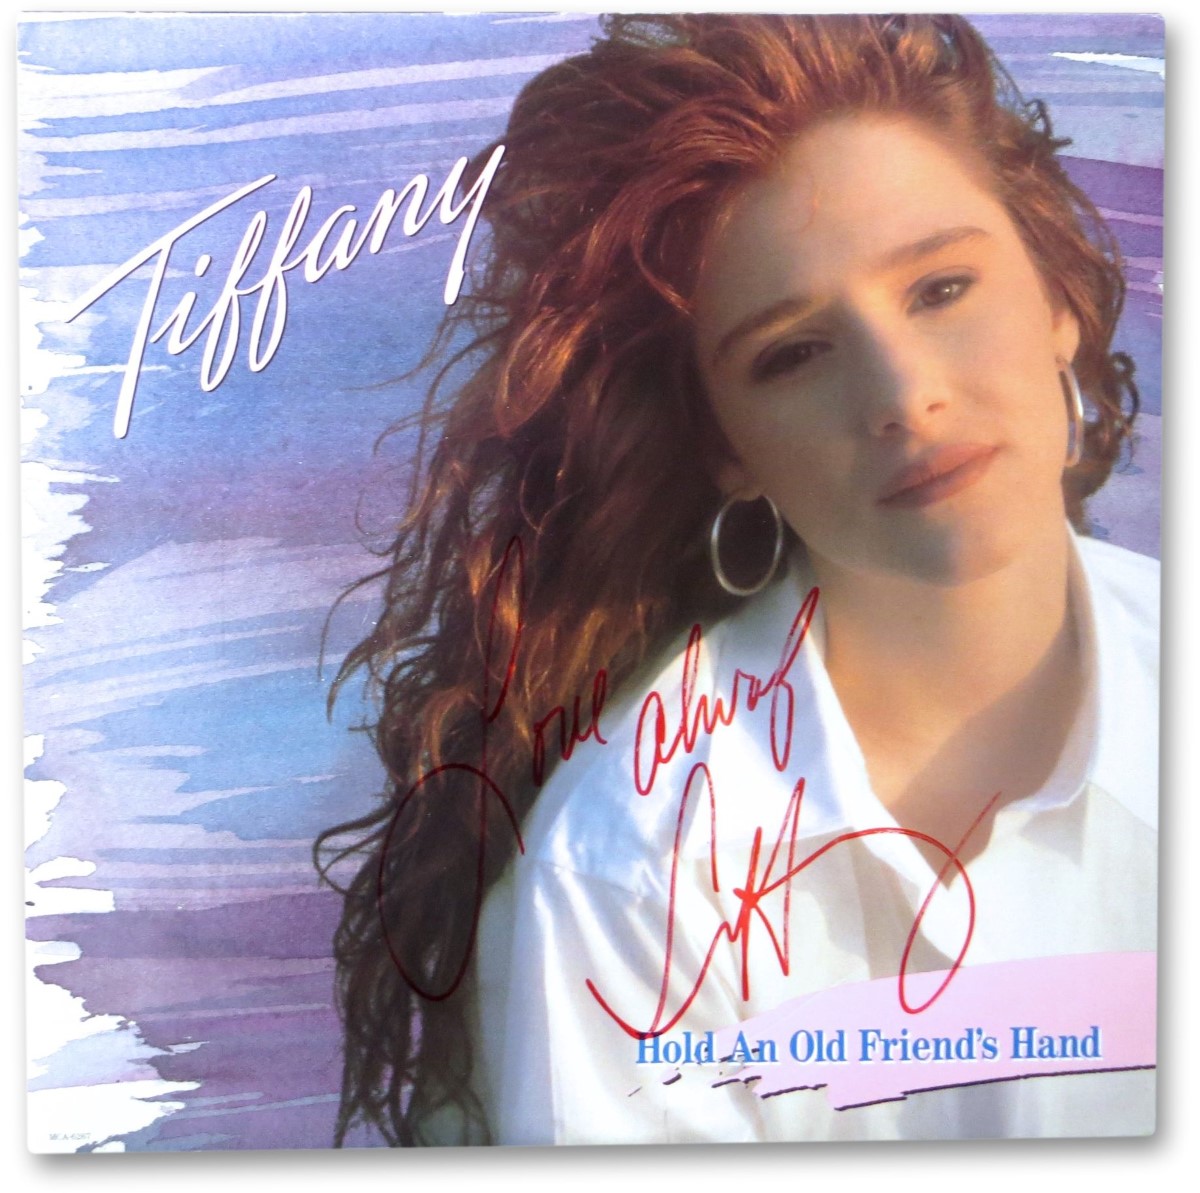 Hand-Signed Pieces of Me CD - Tiffany - Official Webstore - Tiffany